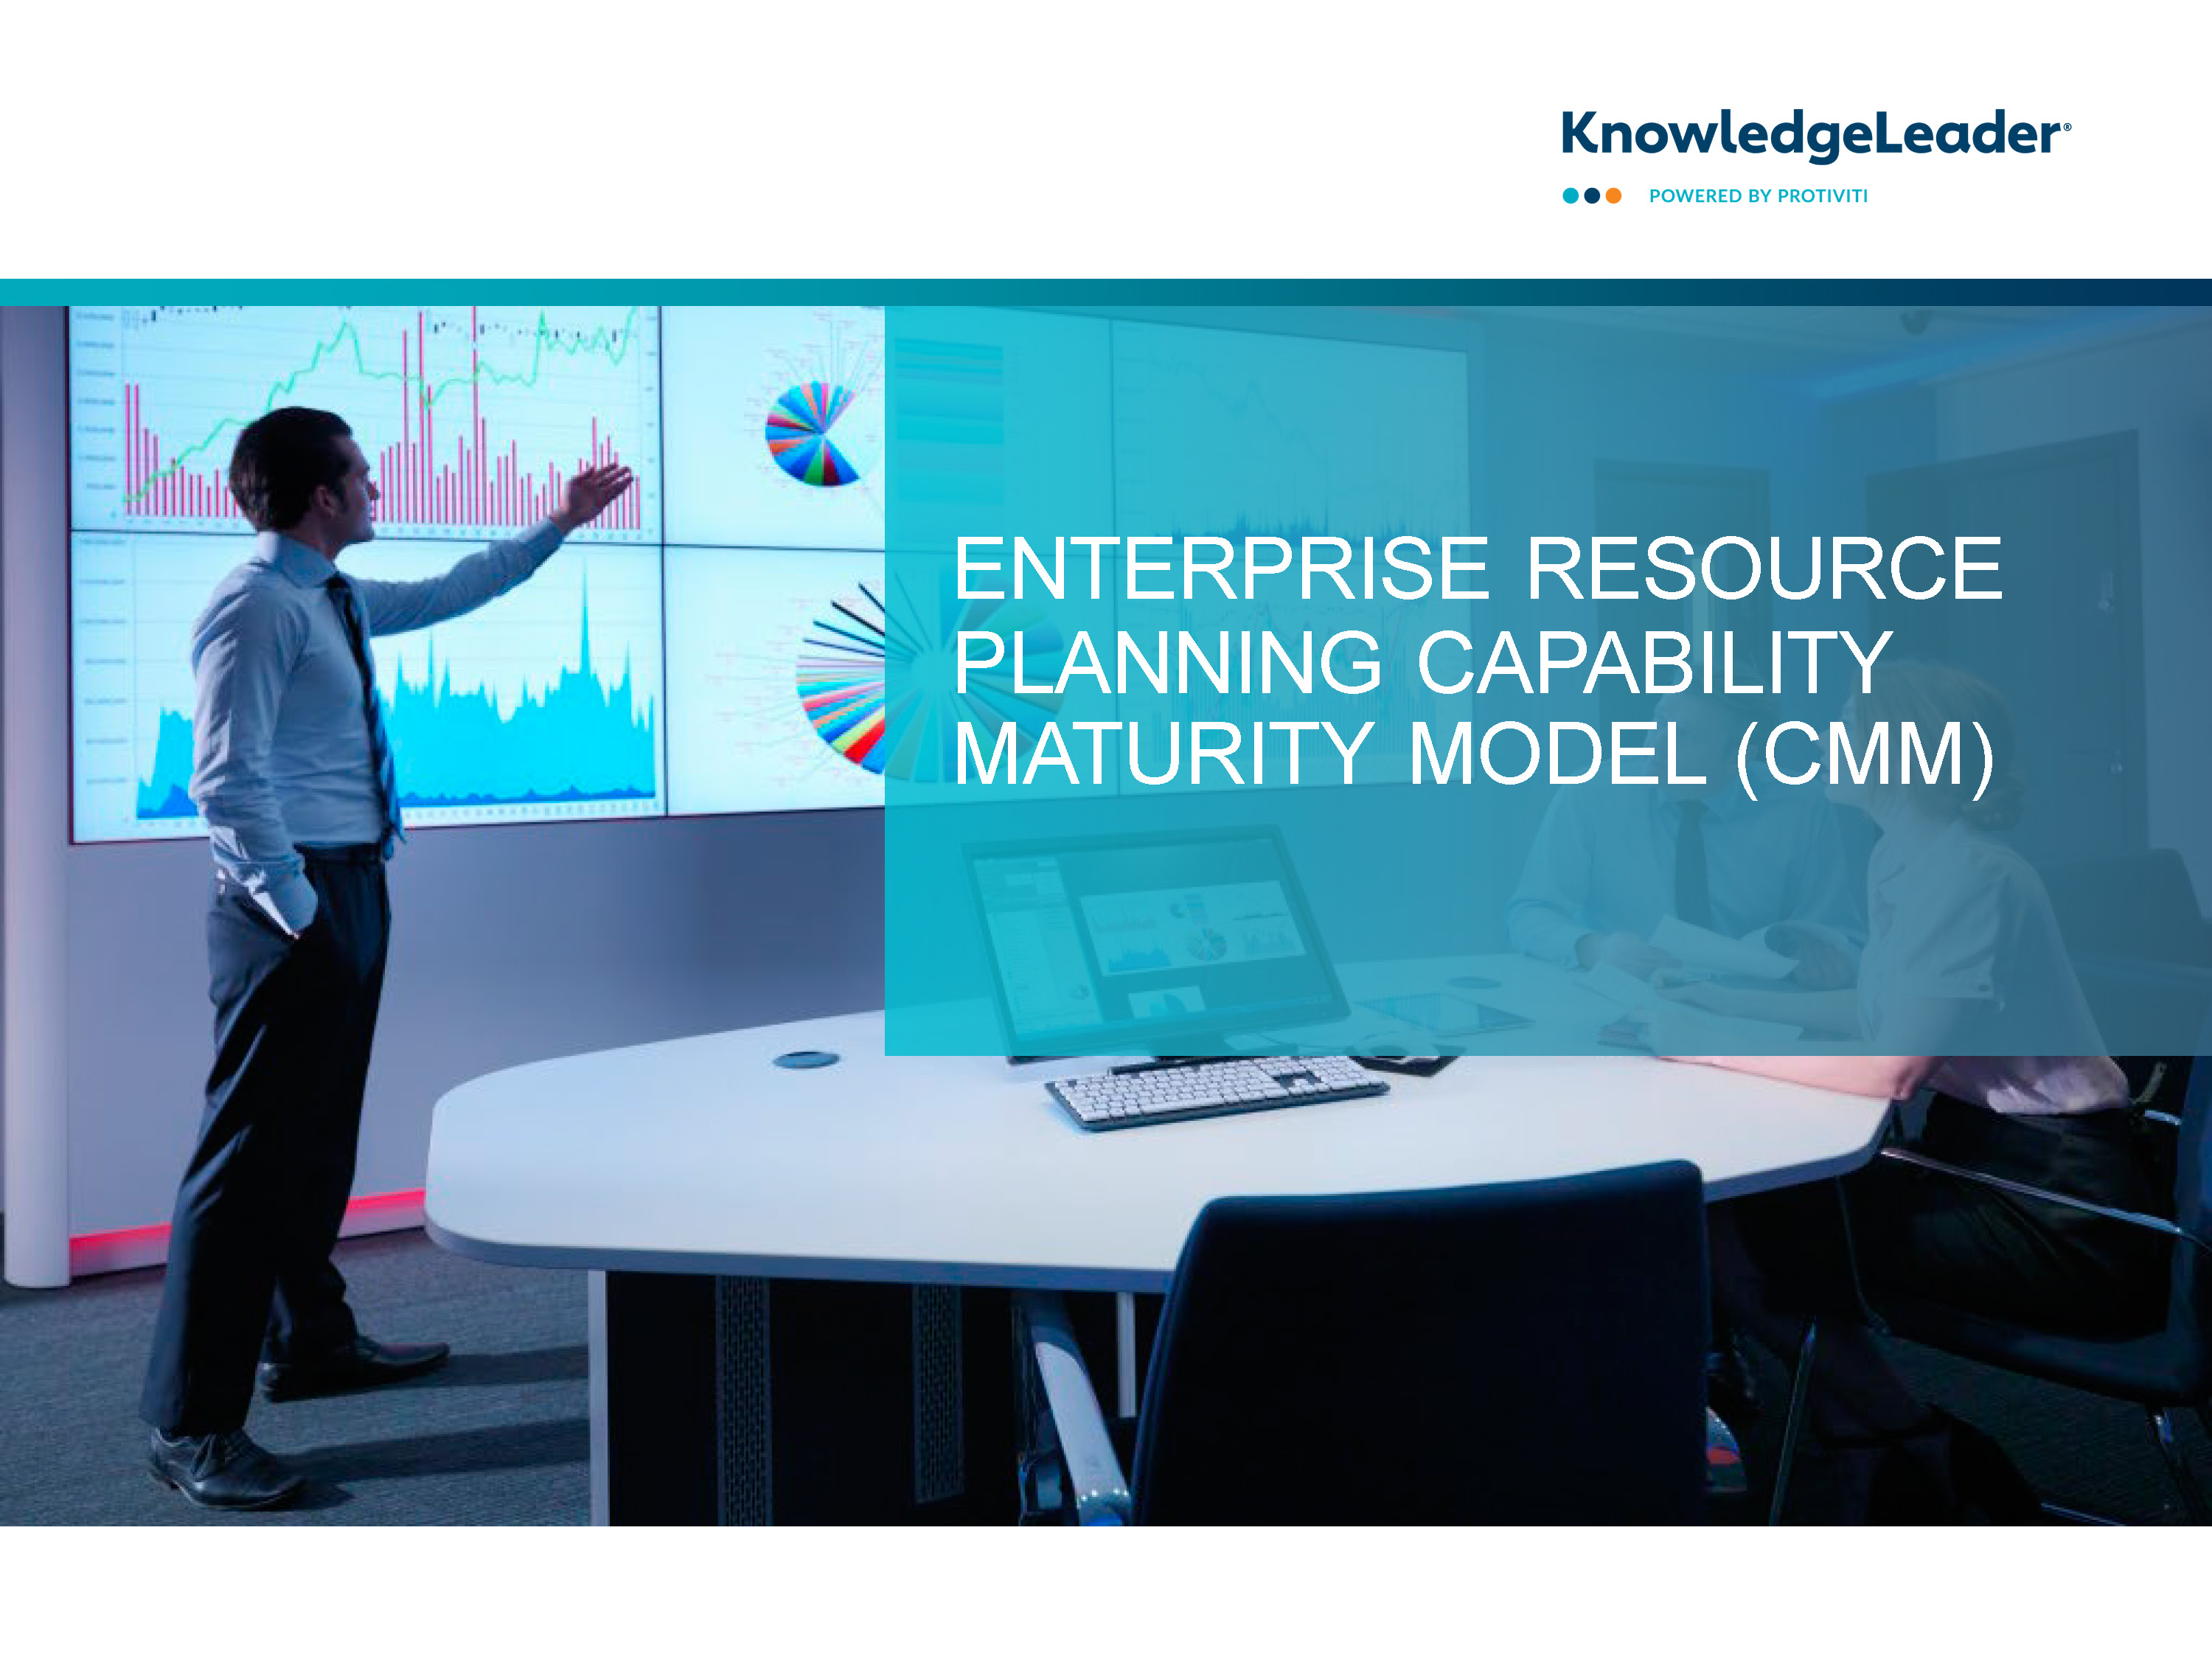 Screenshot of the first page of Enterprise Resource Planning Capability Maturity Model (CMM)